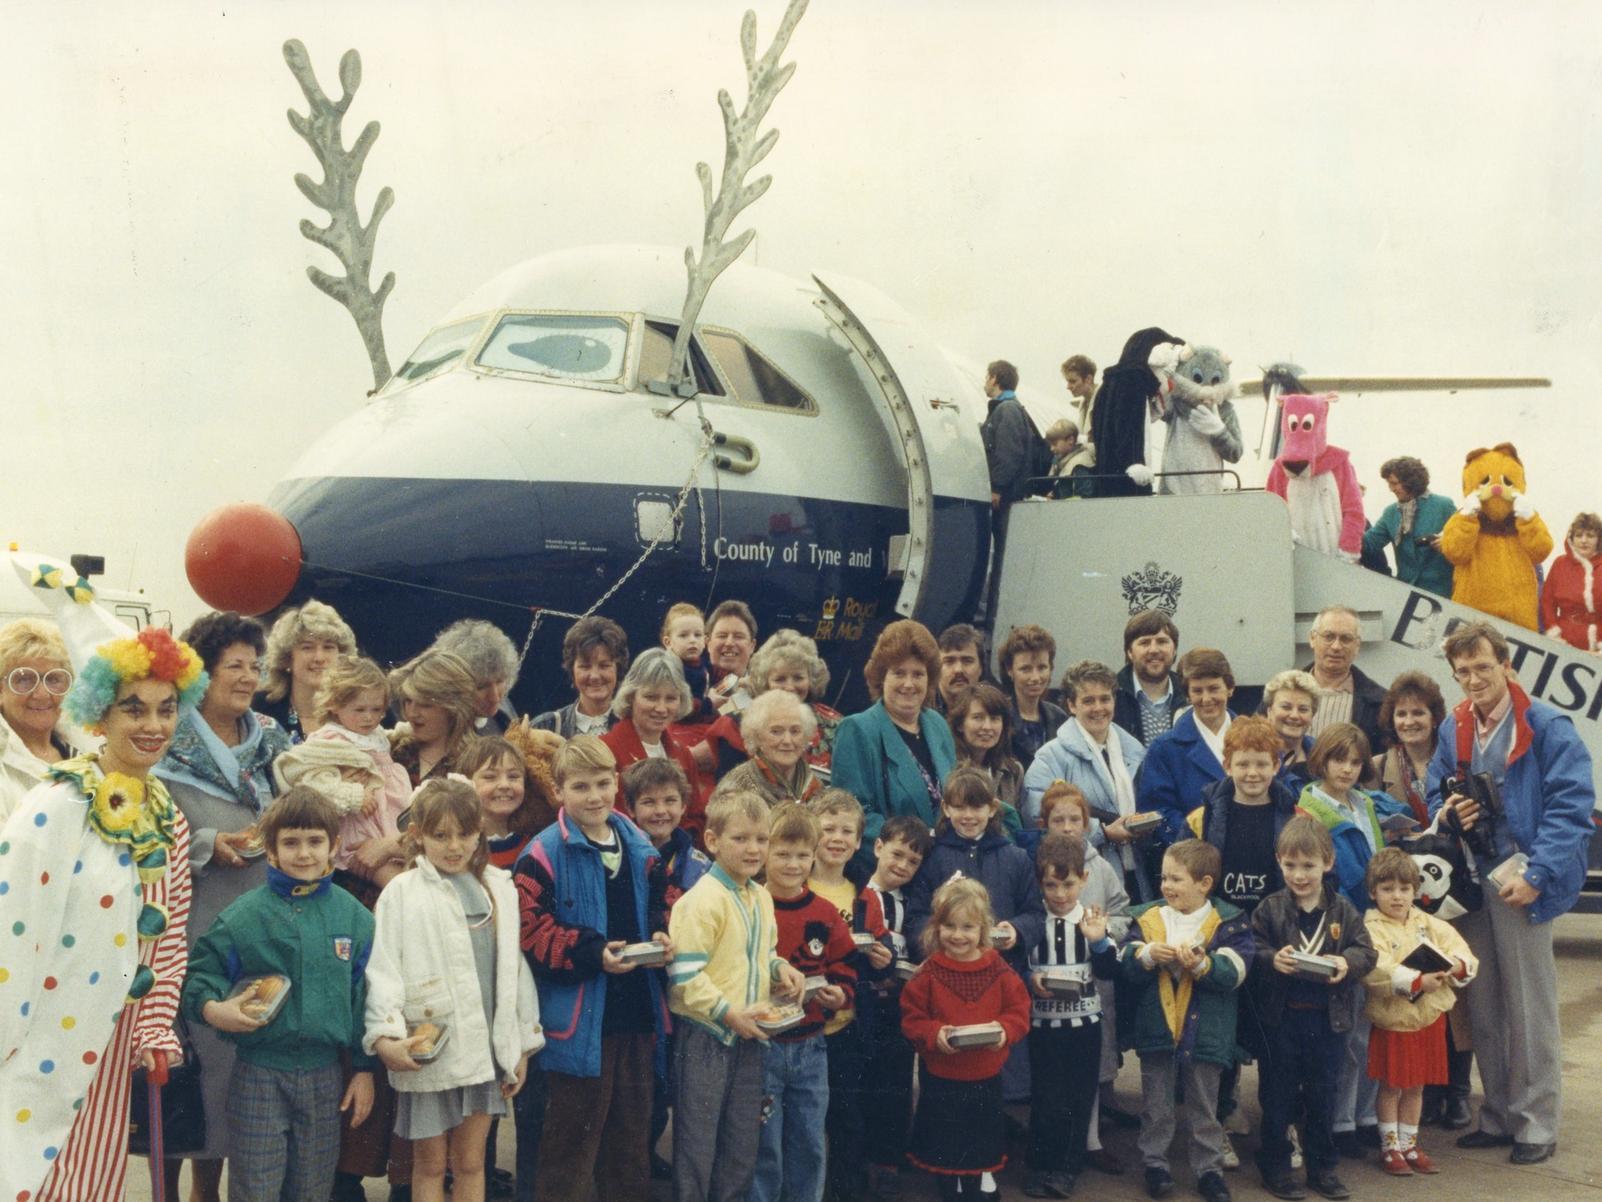 In 1989, the Gazette chartered a British Airways Santa flight to whisk families away to a winter wonderland where Santa broke off from his toy making to greet the excited youngsters on the aircraft